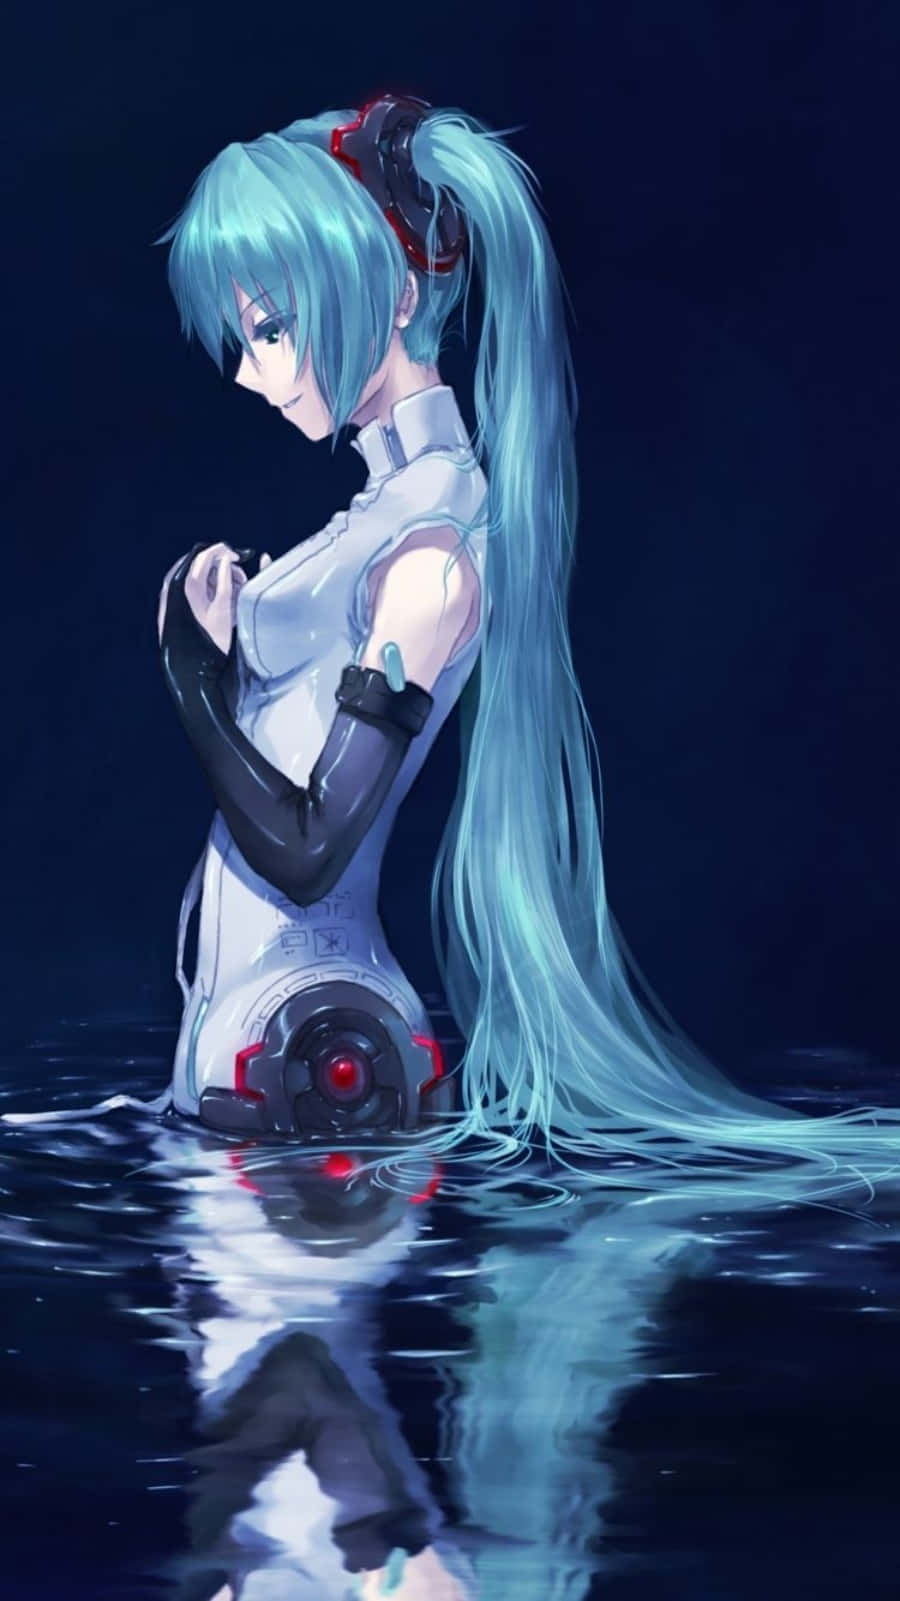 Get ready to connect with the world around you – Hatsune Miku Phone Wallpaper